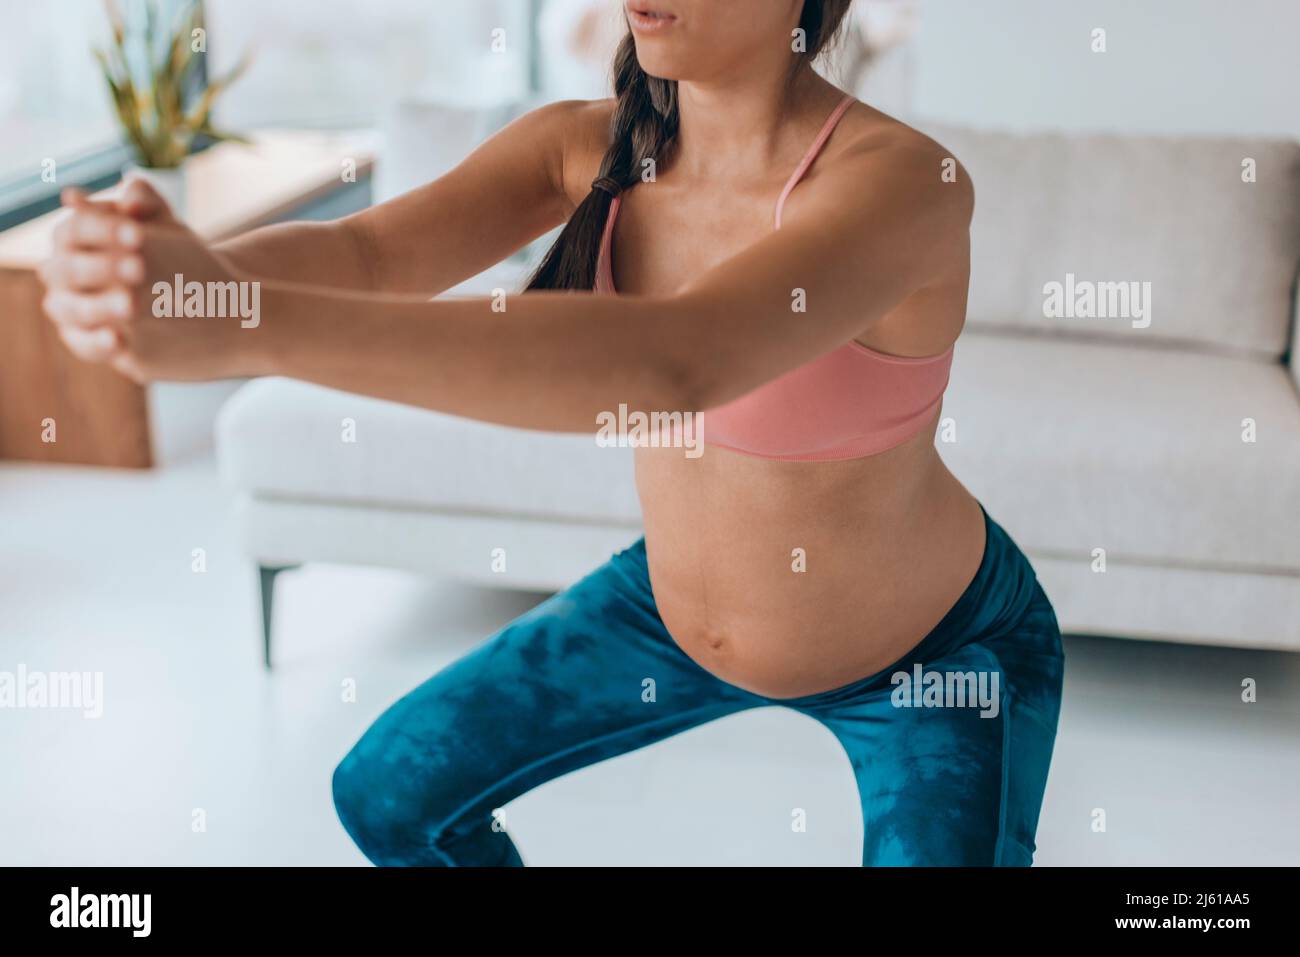 Pregnancy workout woman doing squat glutes exercises at home. Prenatal fitness training for pregnant women Stock Photo